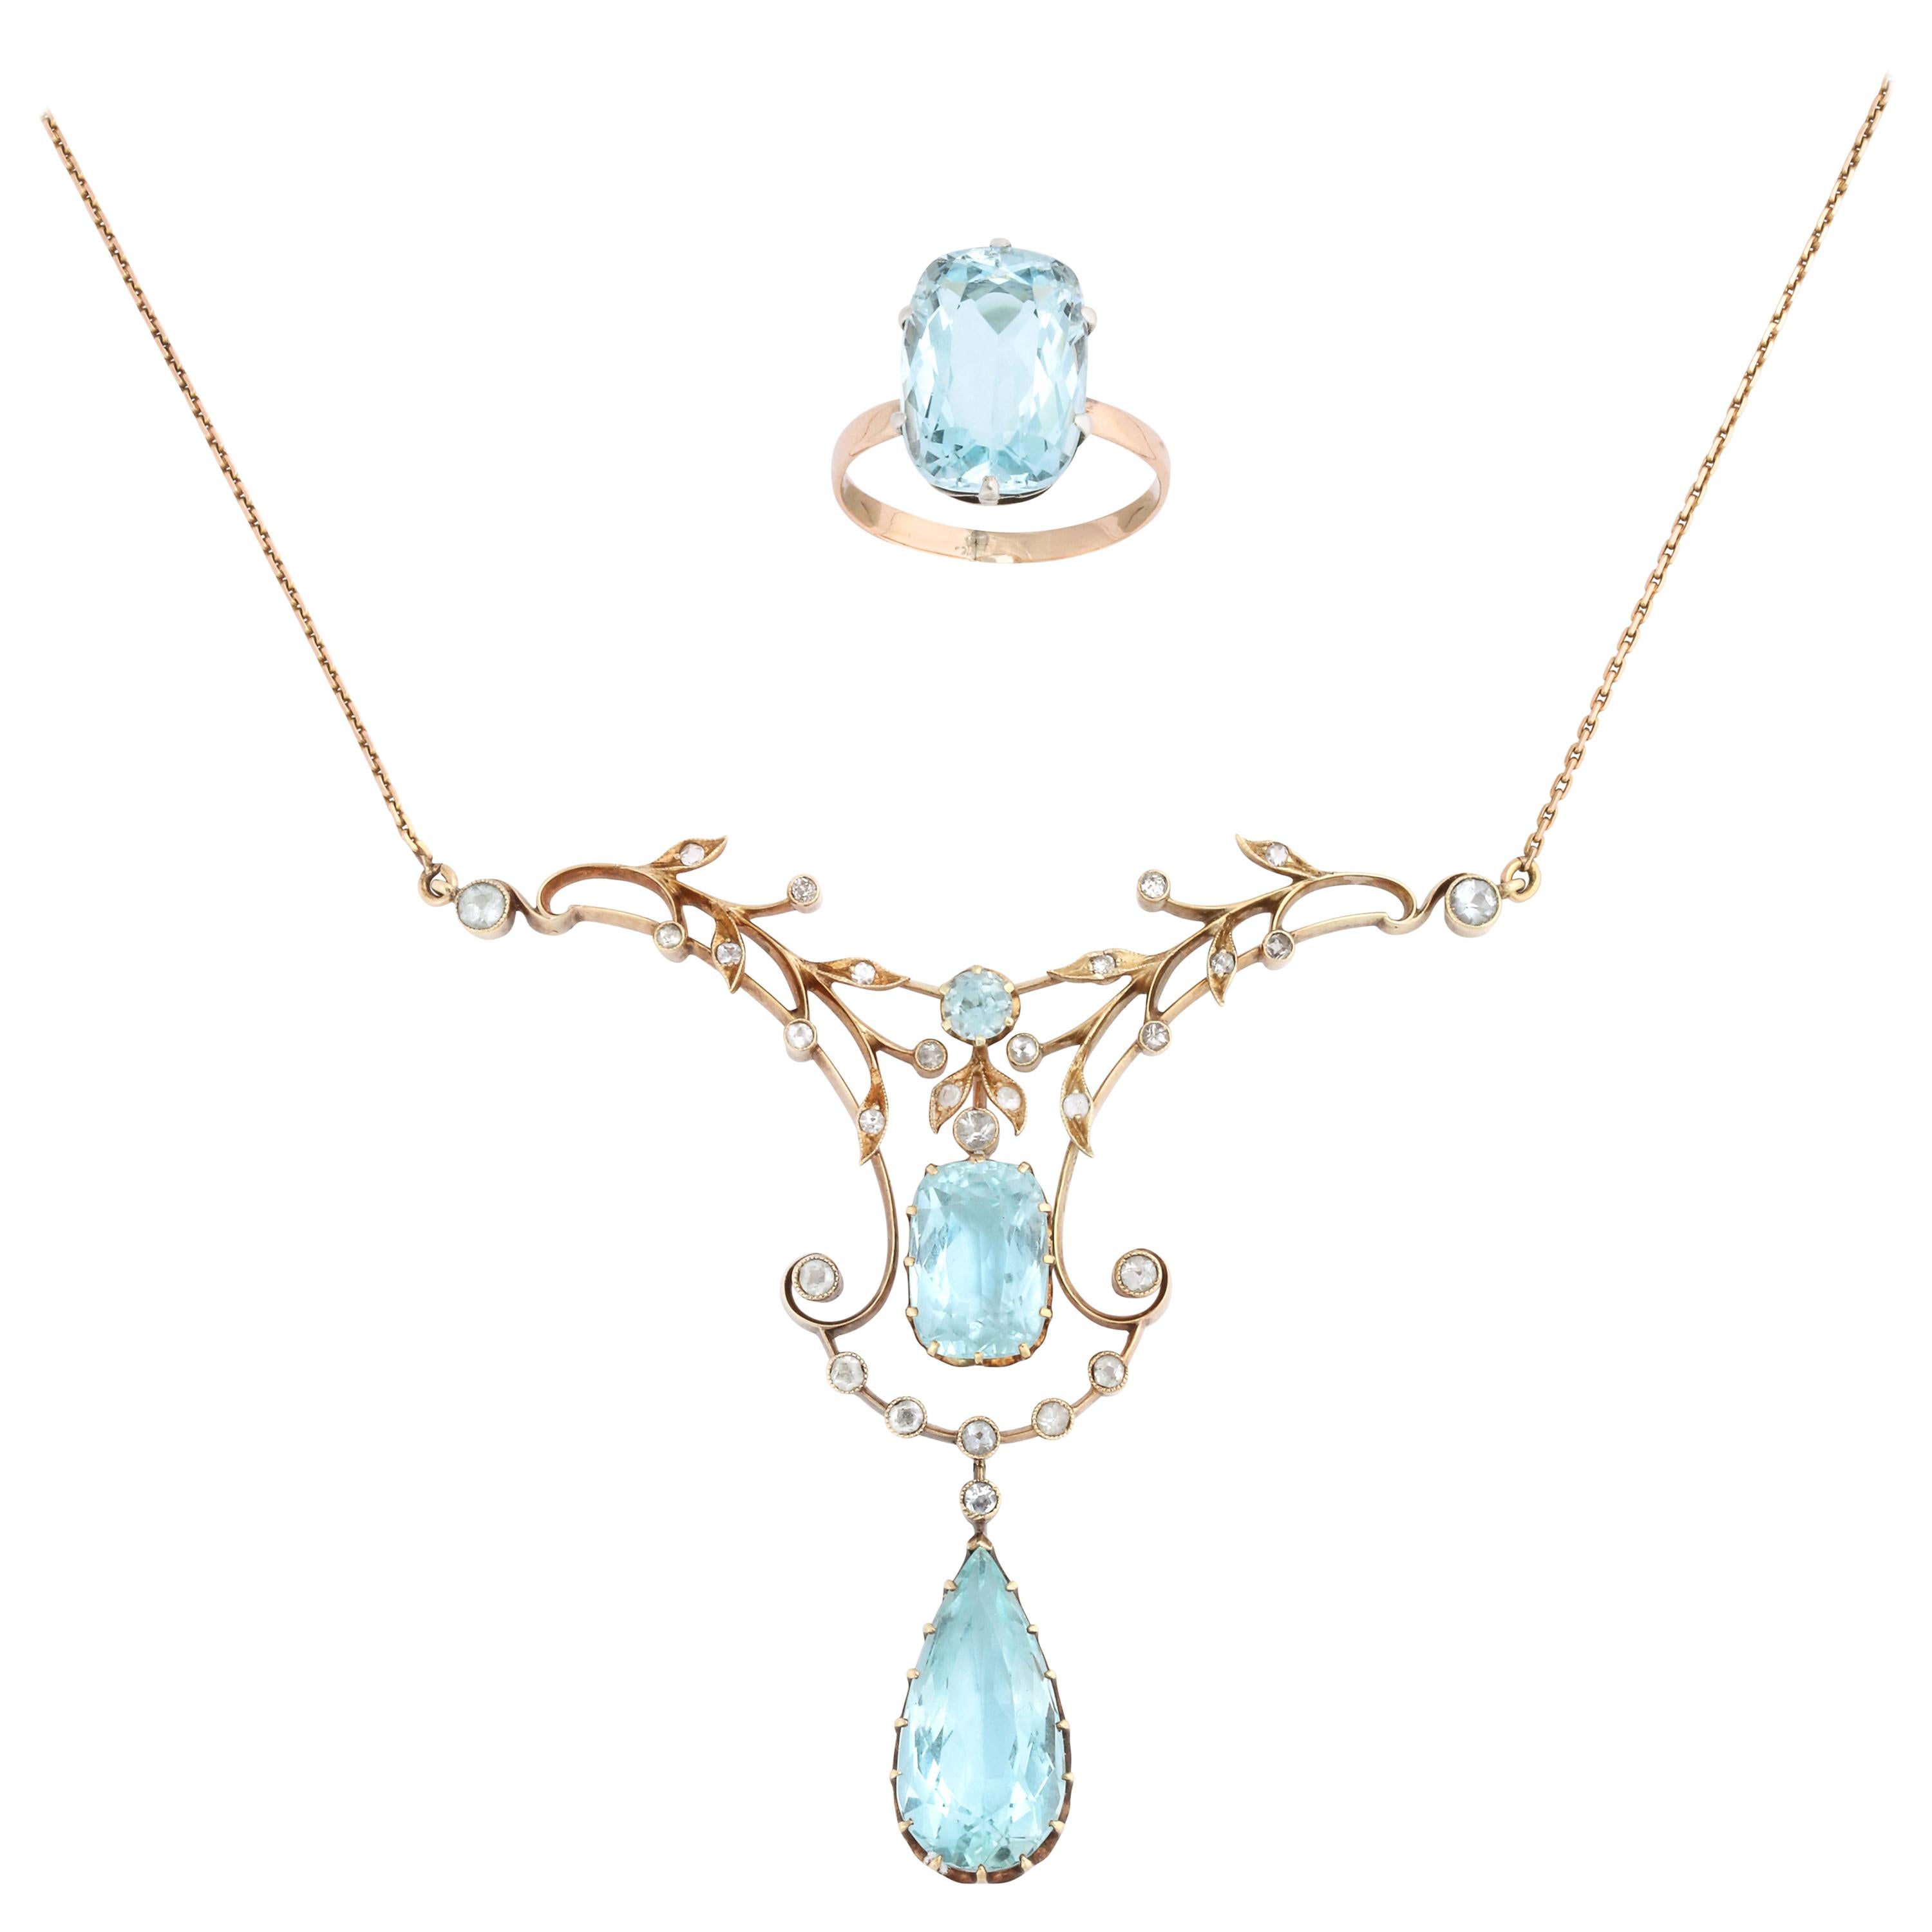 Russian Imperial-era Aquamarine Necklace and Ring, St. Petersburg, c. 1910 For Sale